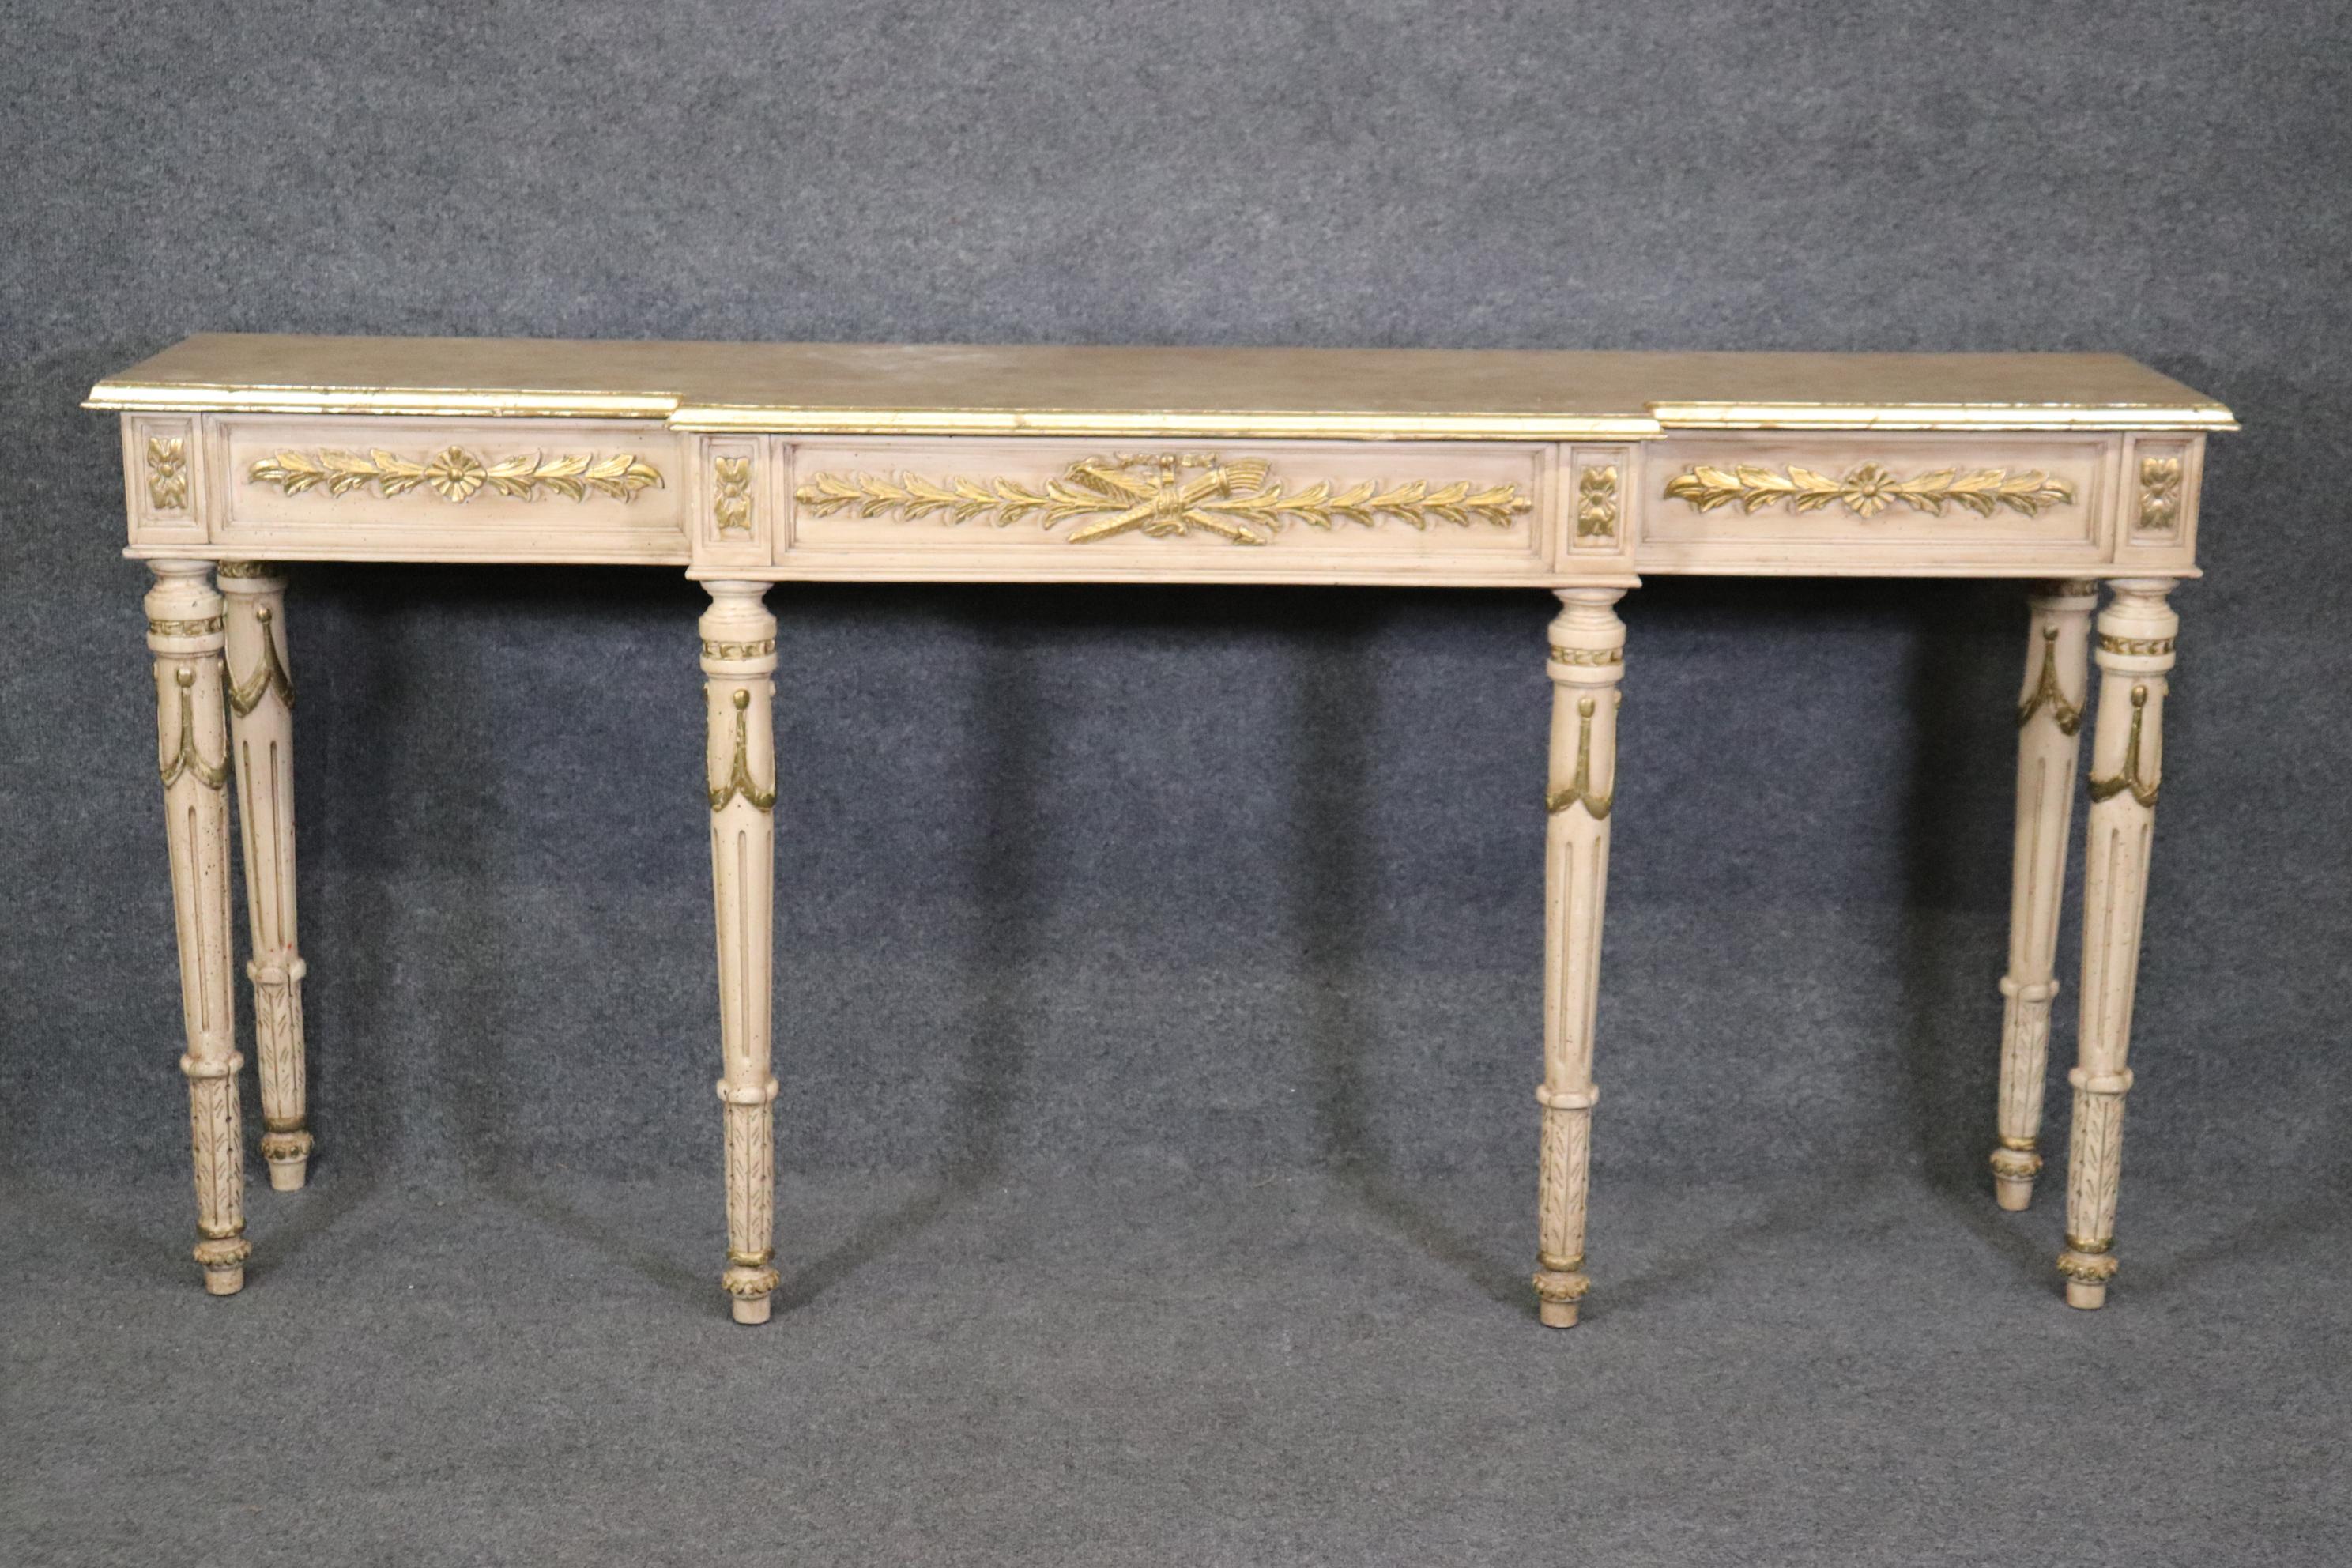 This is a beautiful console table with a distressed gilded and painted finish and faux marble painted top. The table dates to the 1990s era and measures 72 wide x 17 deep x 33 tall. 



We can help with shipping to the ground floor or elevator